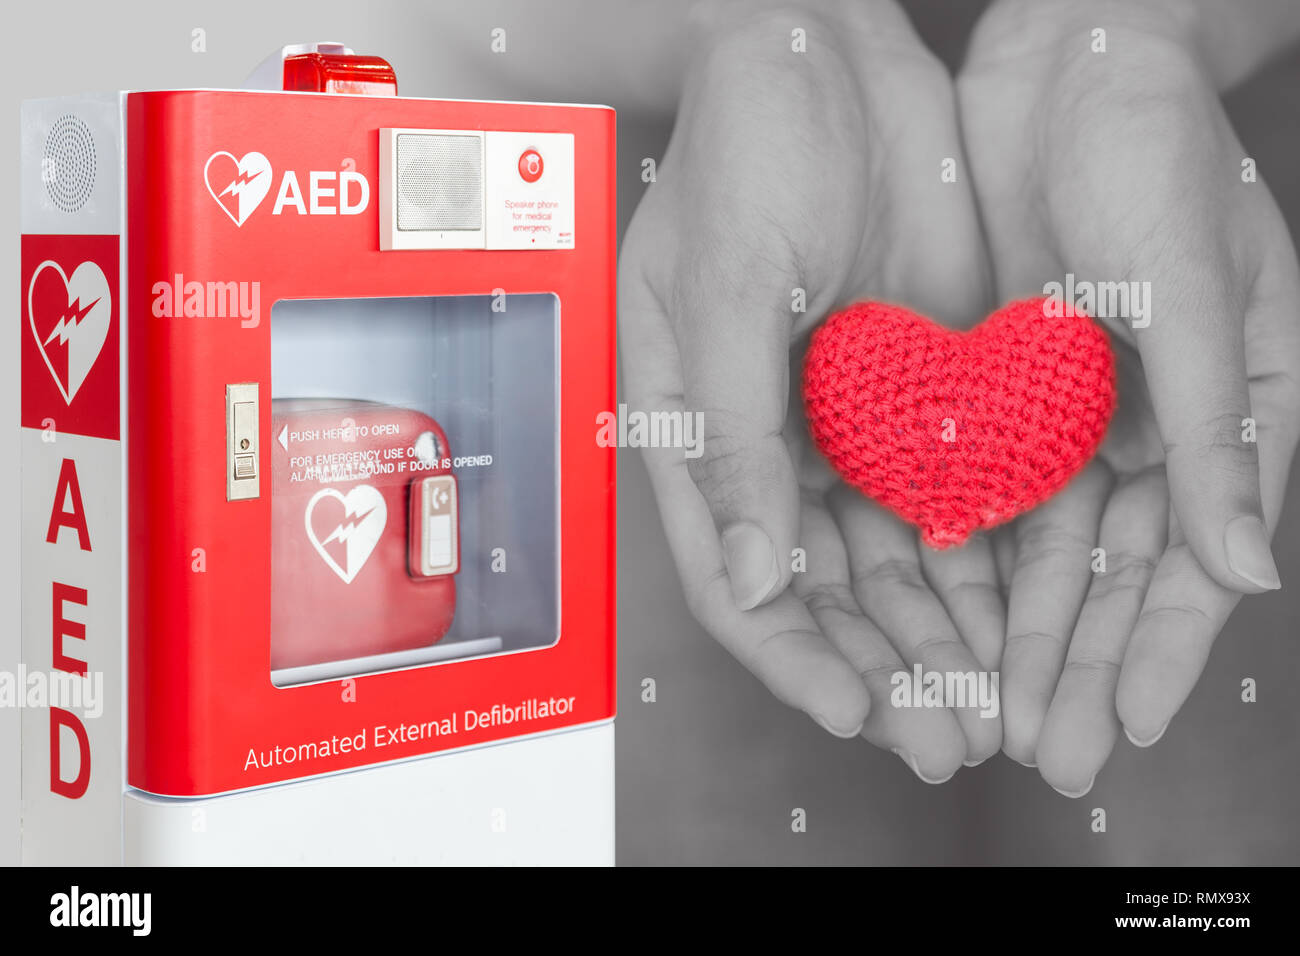 AED or Automated External Defibrillator first aid help giving life heart concept Stock Photo